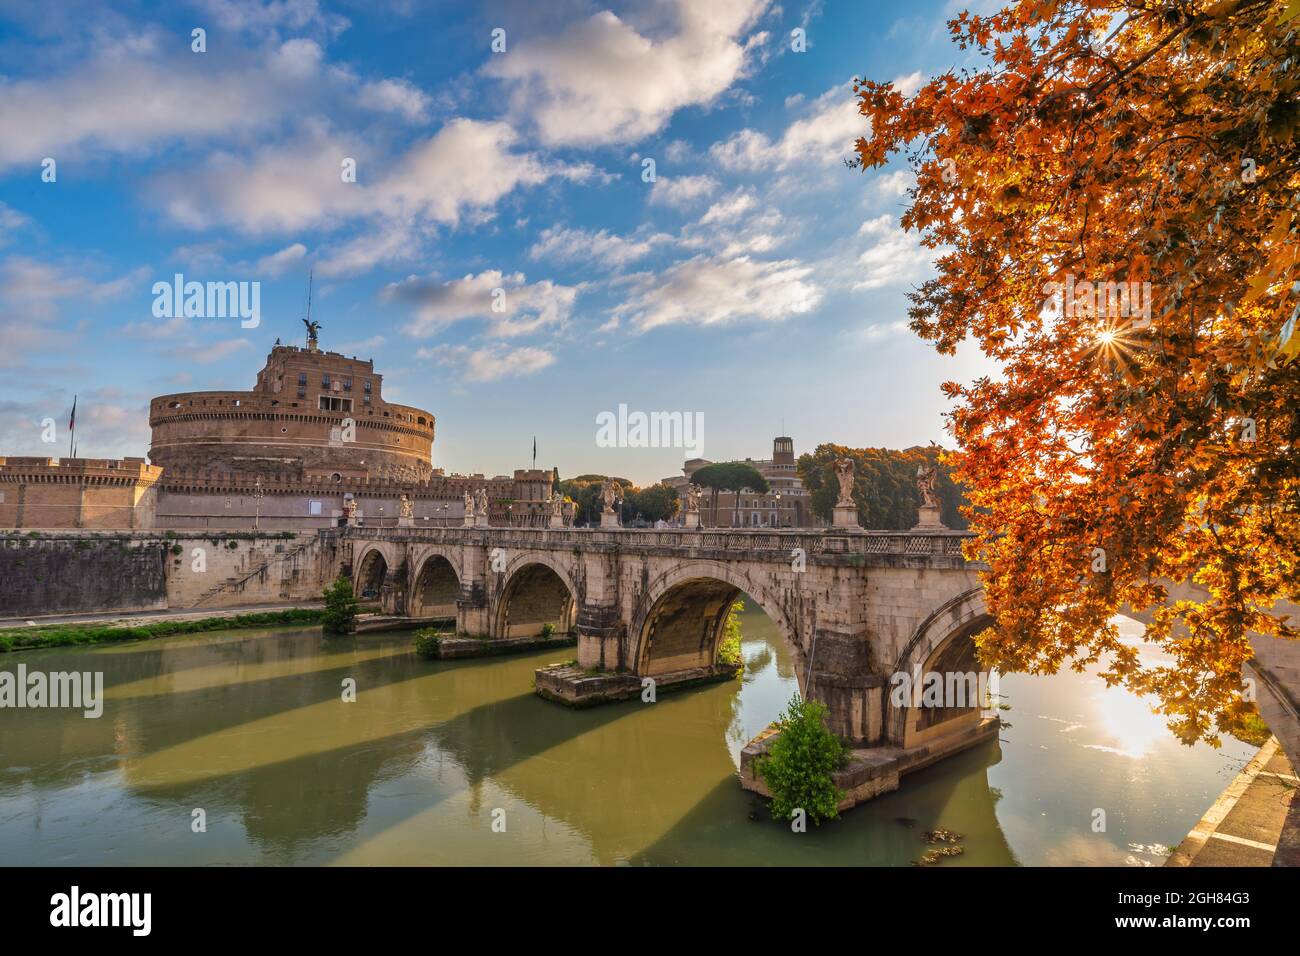 Rome Vatican, city skyline at Tiber River and Castel Sant'Angelo with autumn foliage season Stock Photo